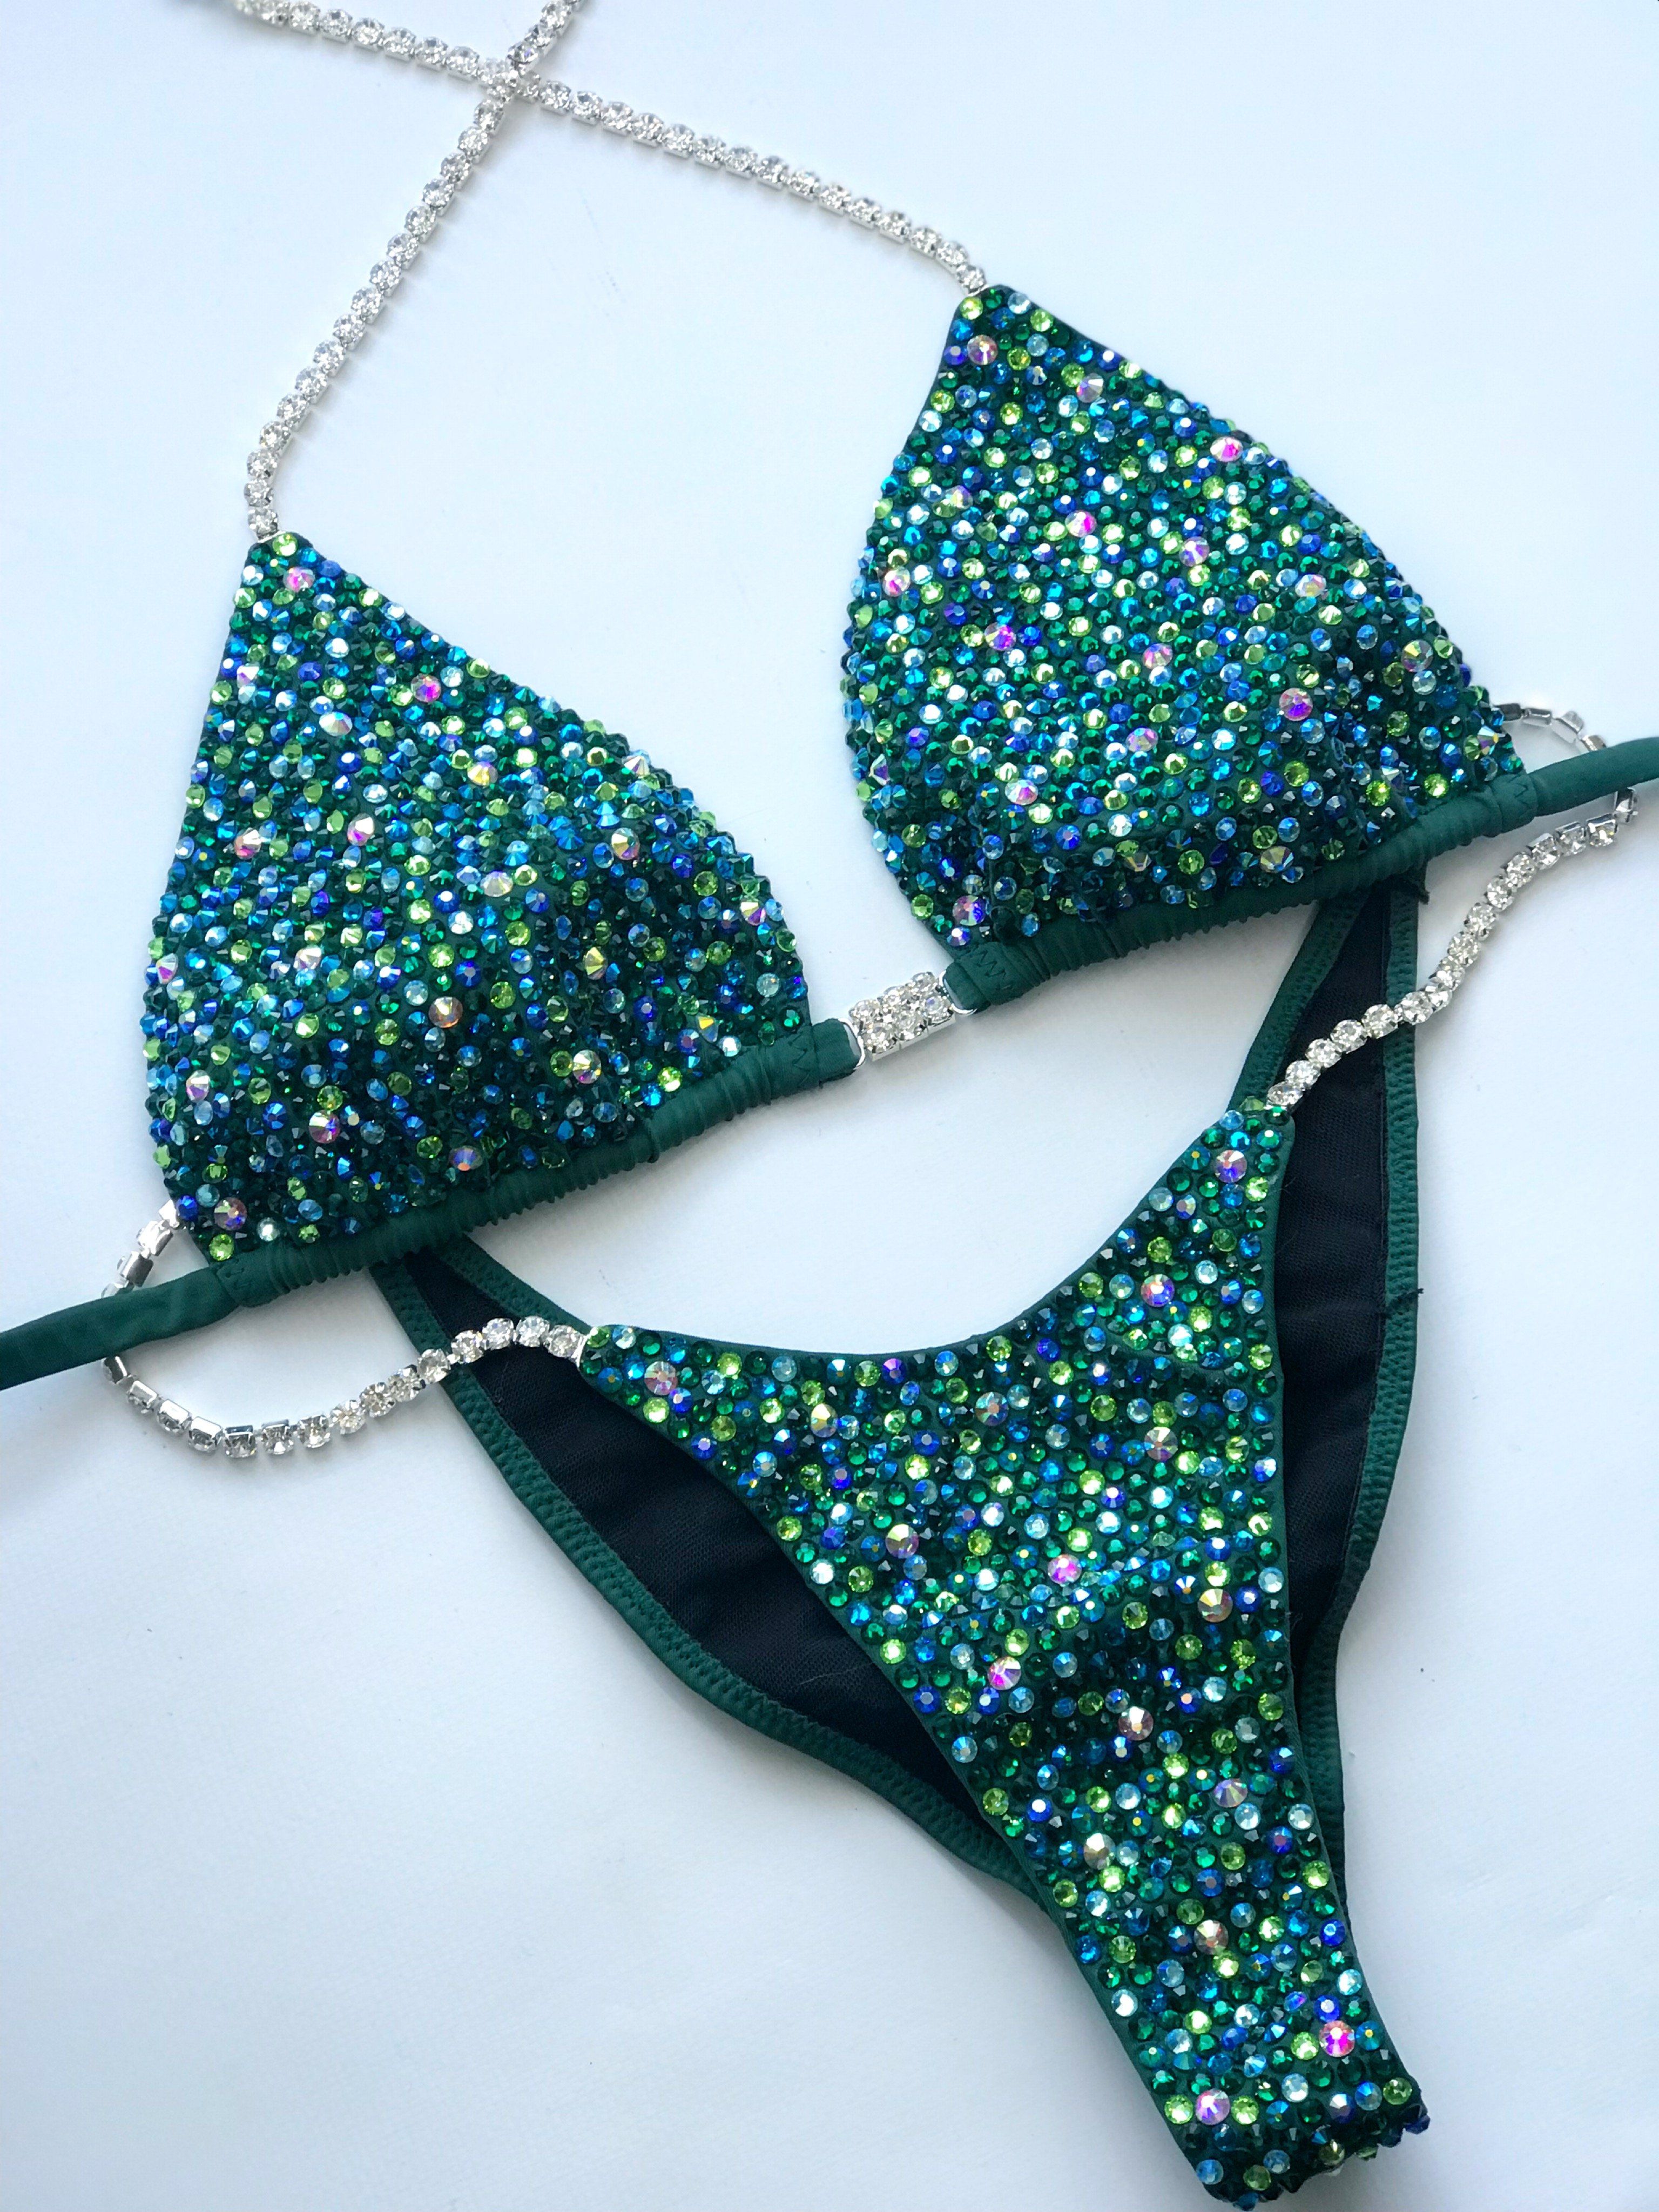 Buy Gold & White Competition Bikini Online in India - Etsy